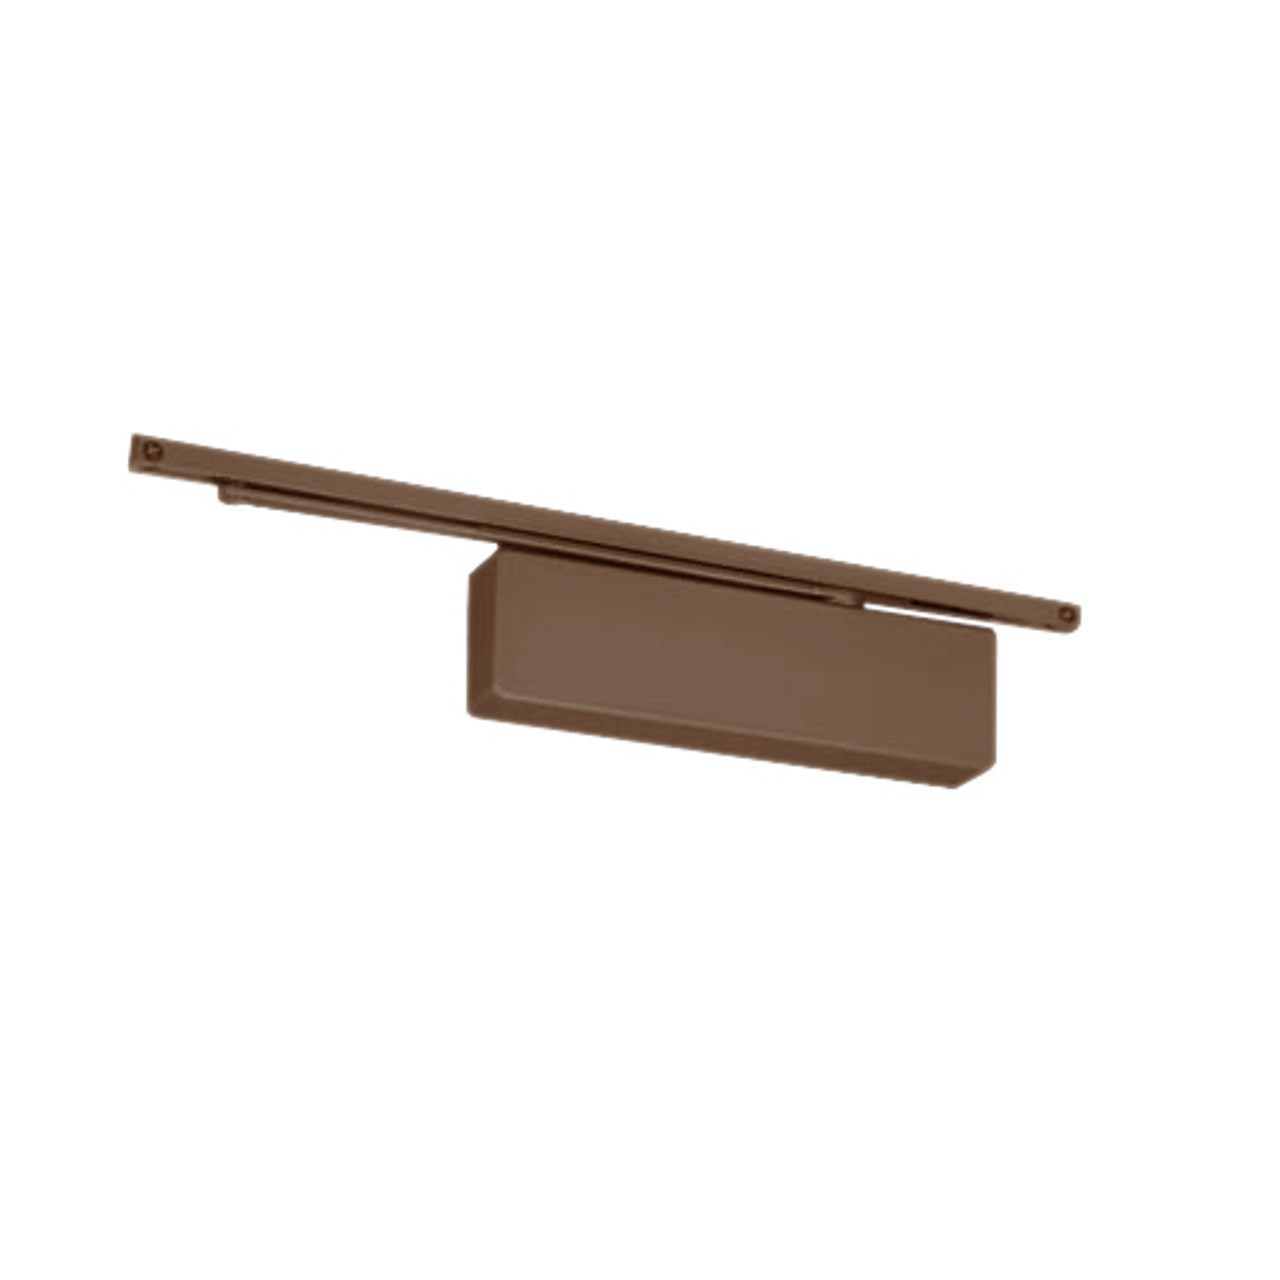 7570STDA-691-LH Norton 7570 Series Security Door Closer with Pull Side Slide Track Arm in Dull Bronze Finish